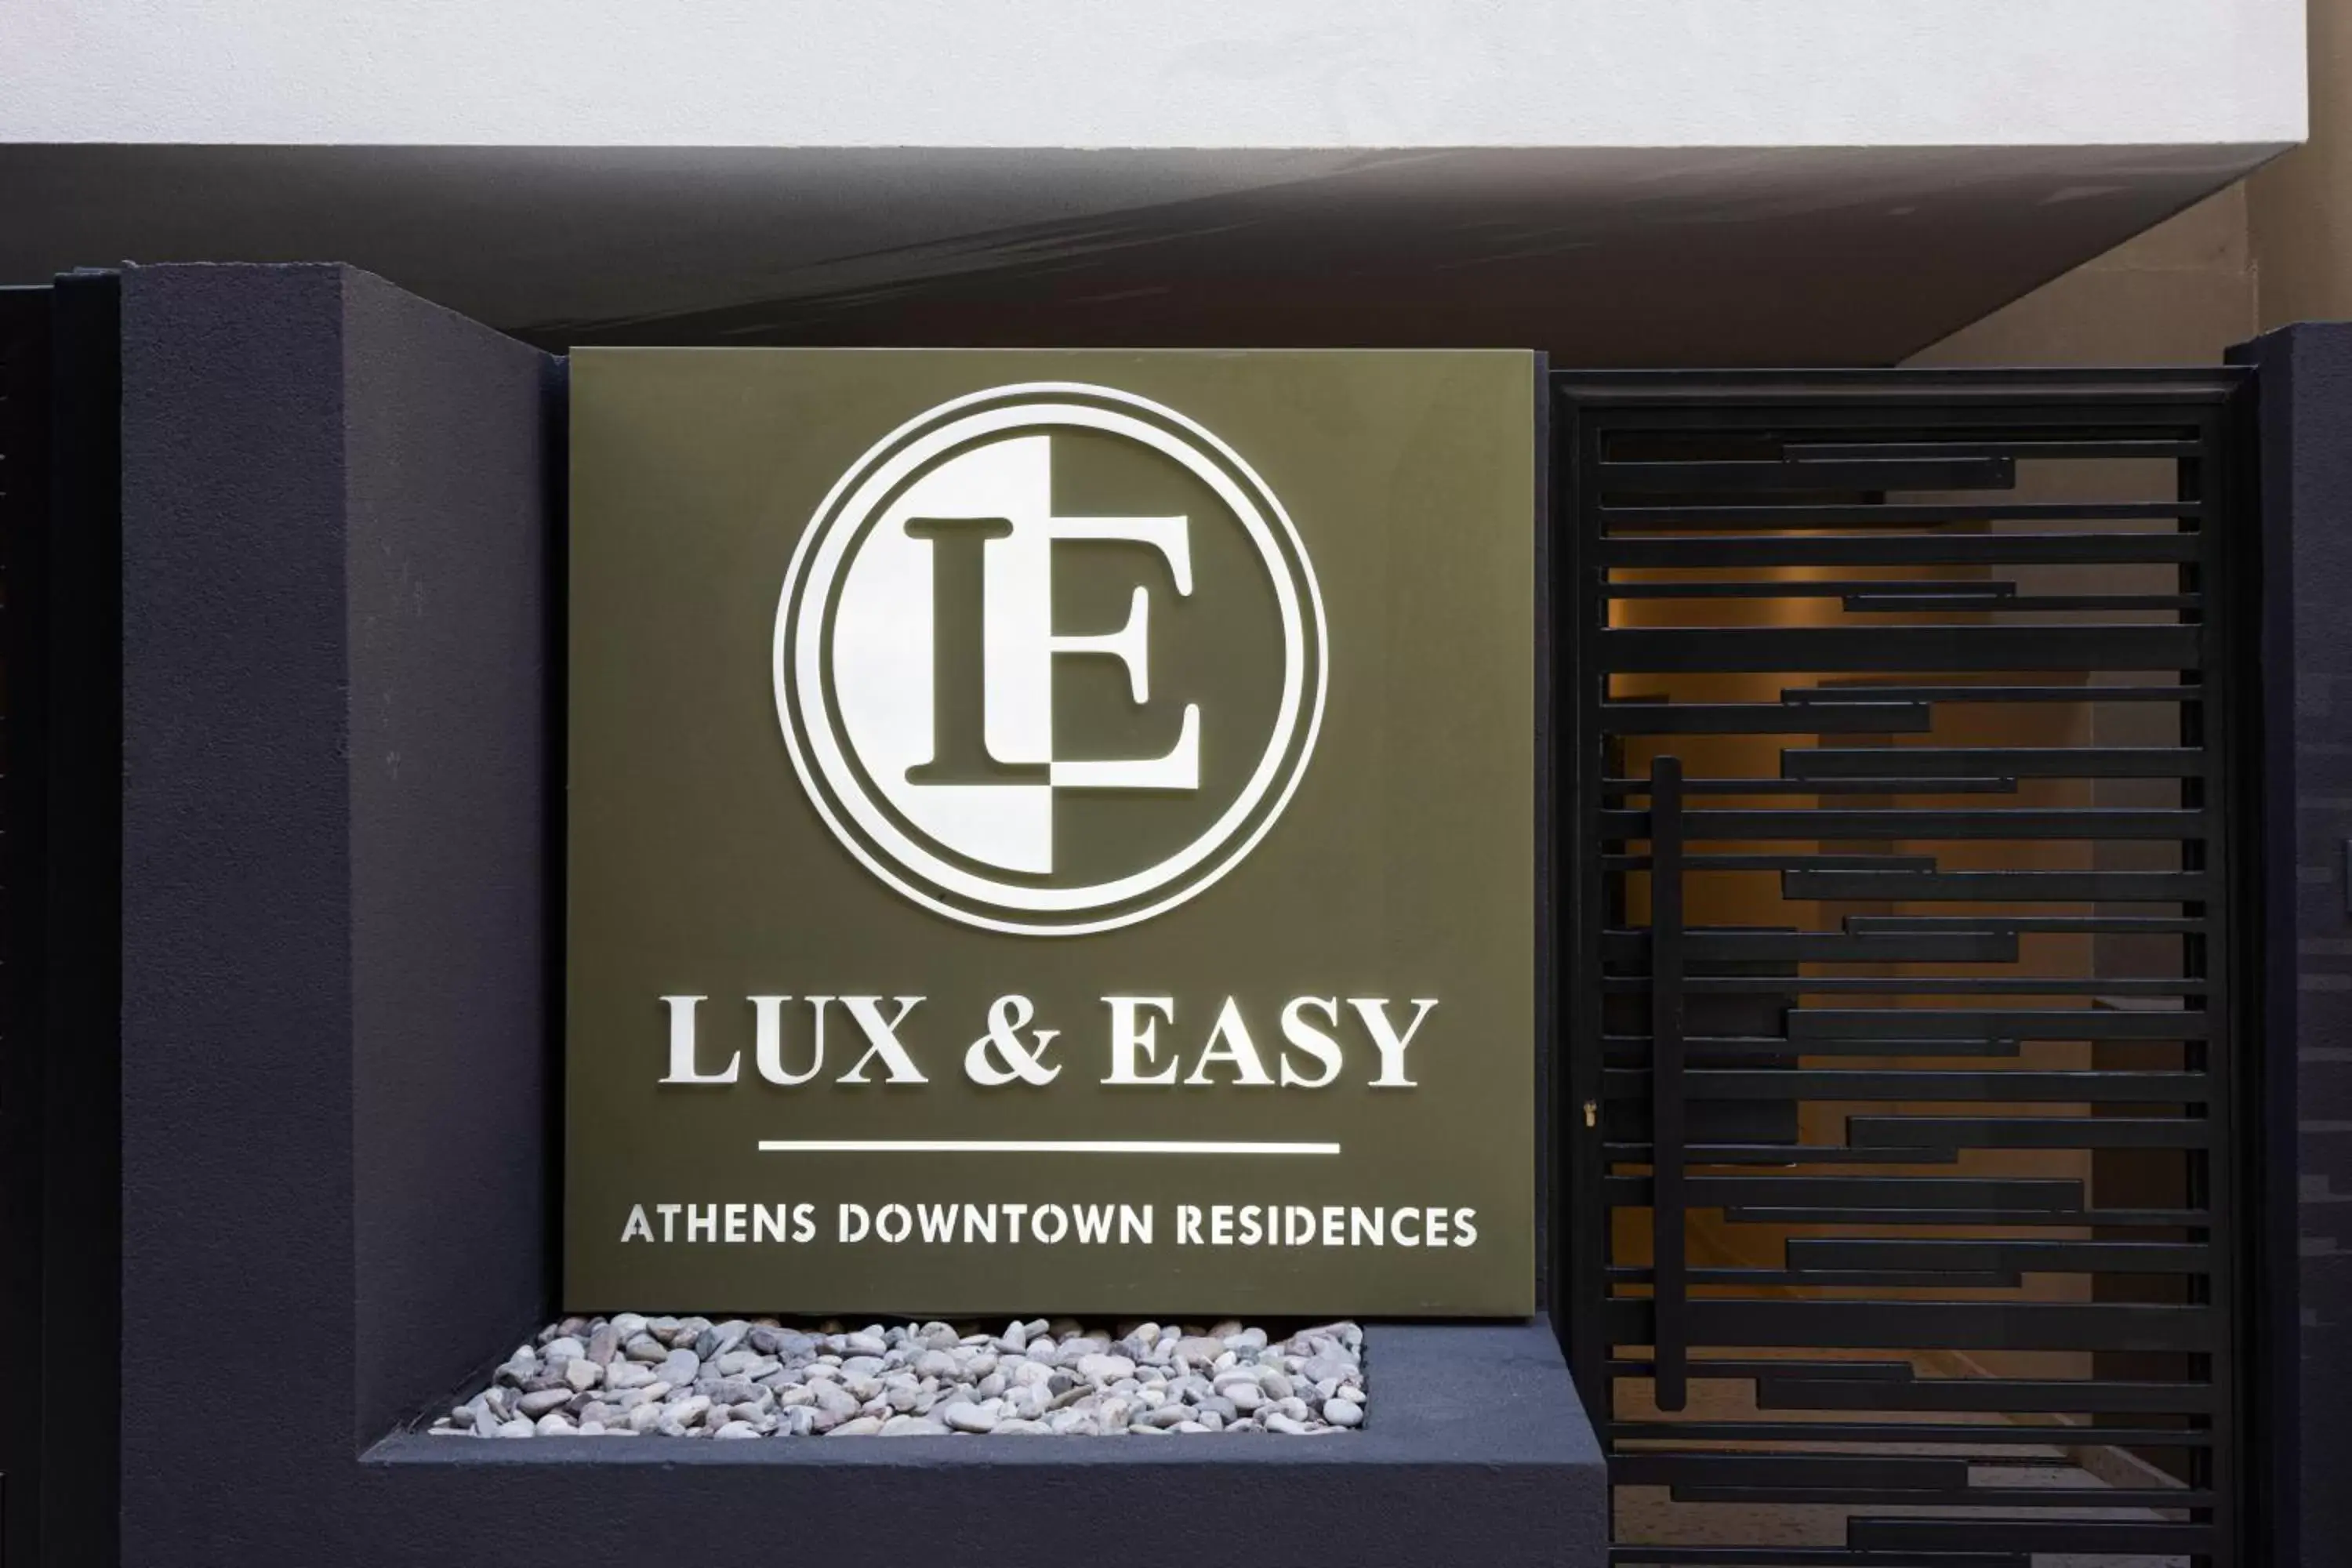 Property logo or sign in LUX&EASY Athens Downtown Residences